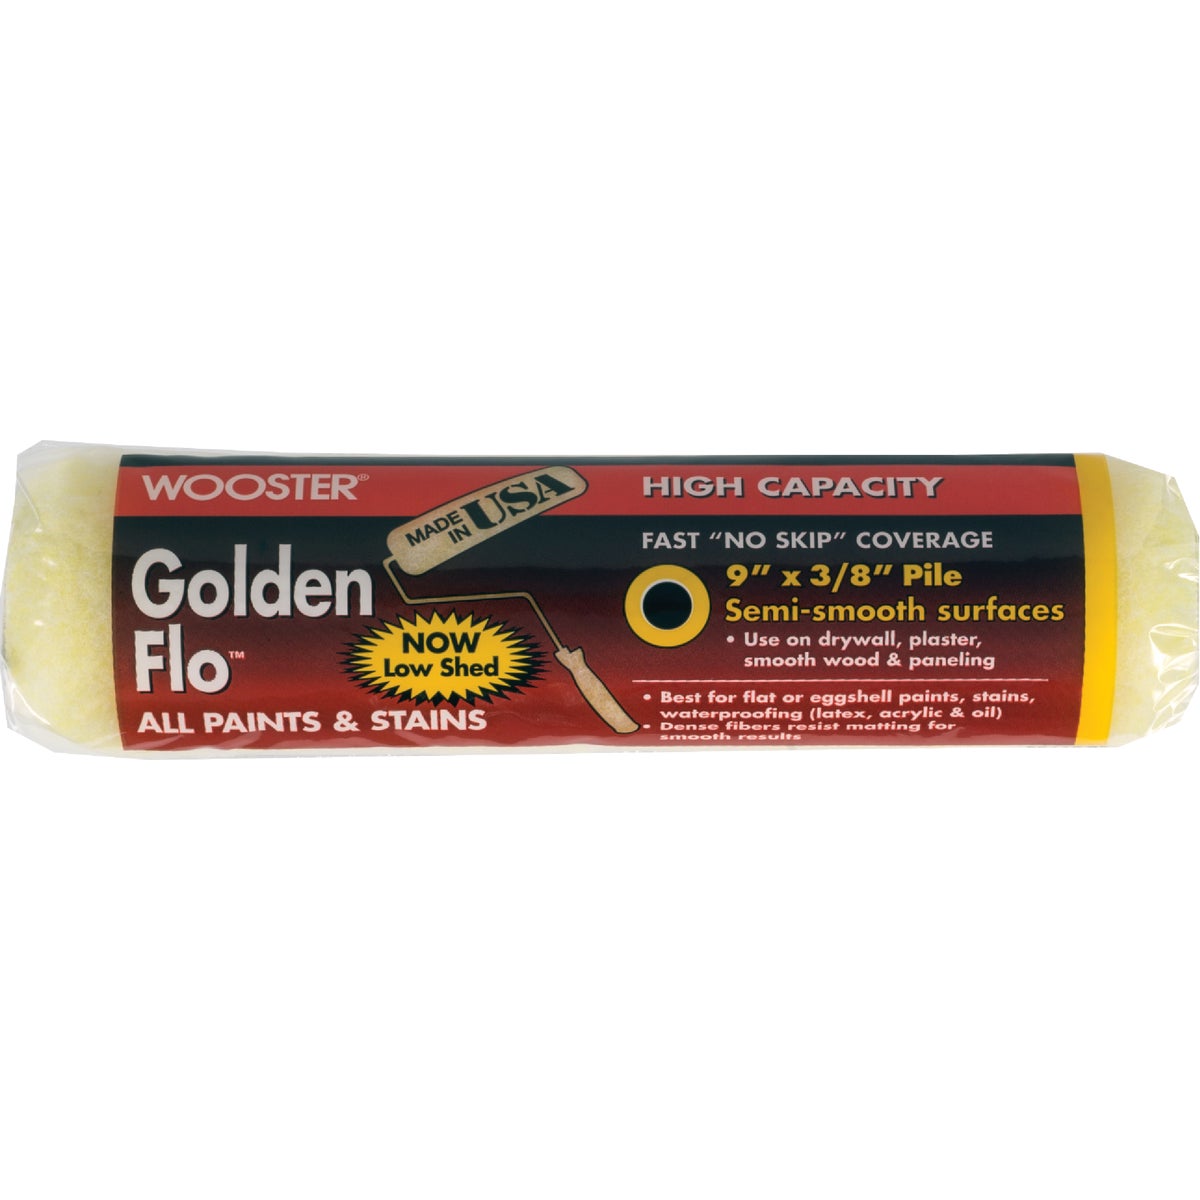 Wooster Golden Flo 9 In. x 3/8 In. Knit Fabric Roller Cover